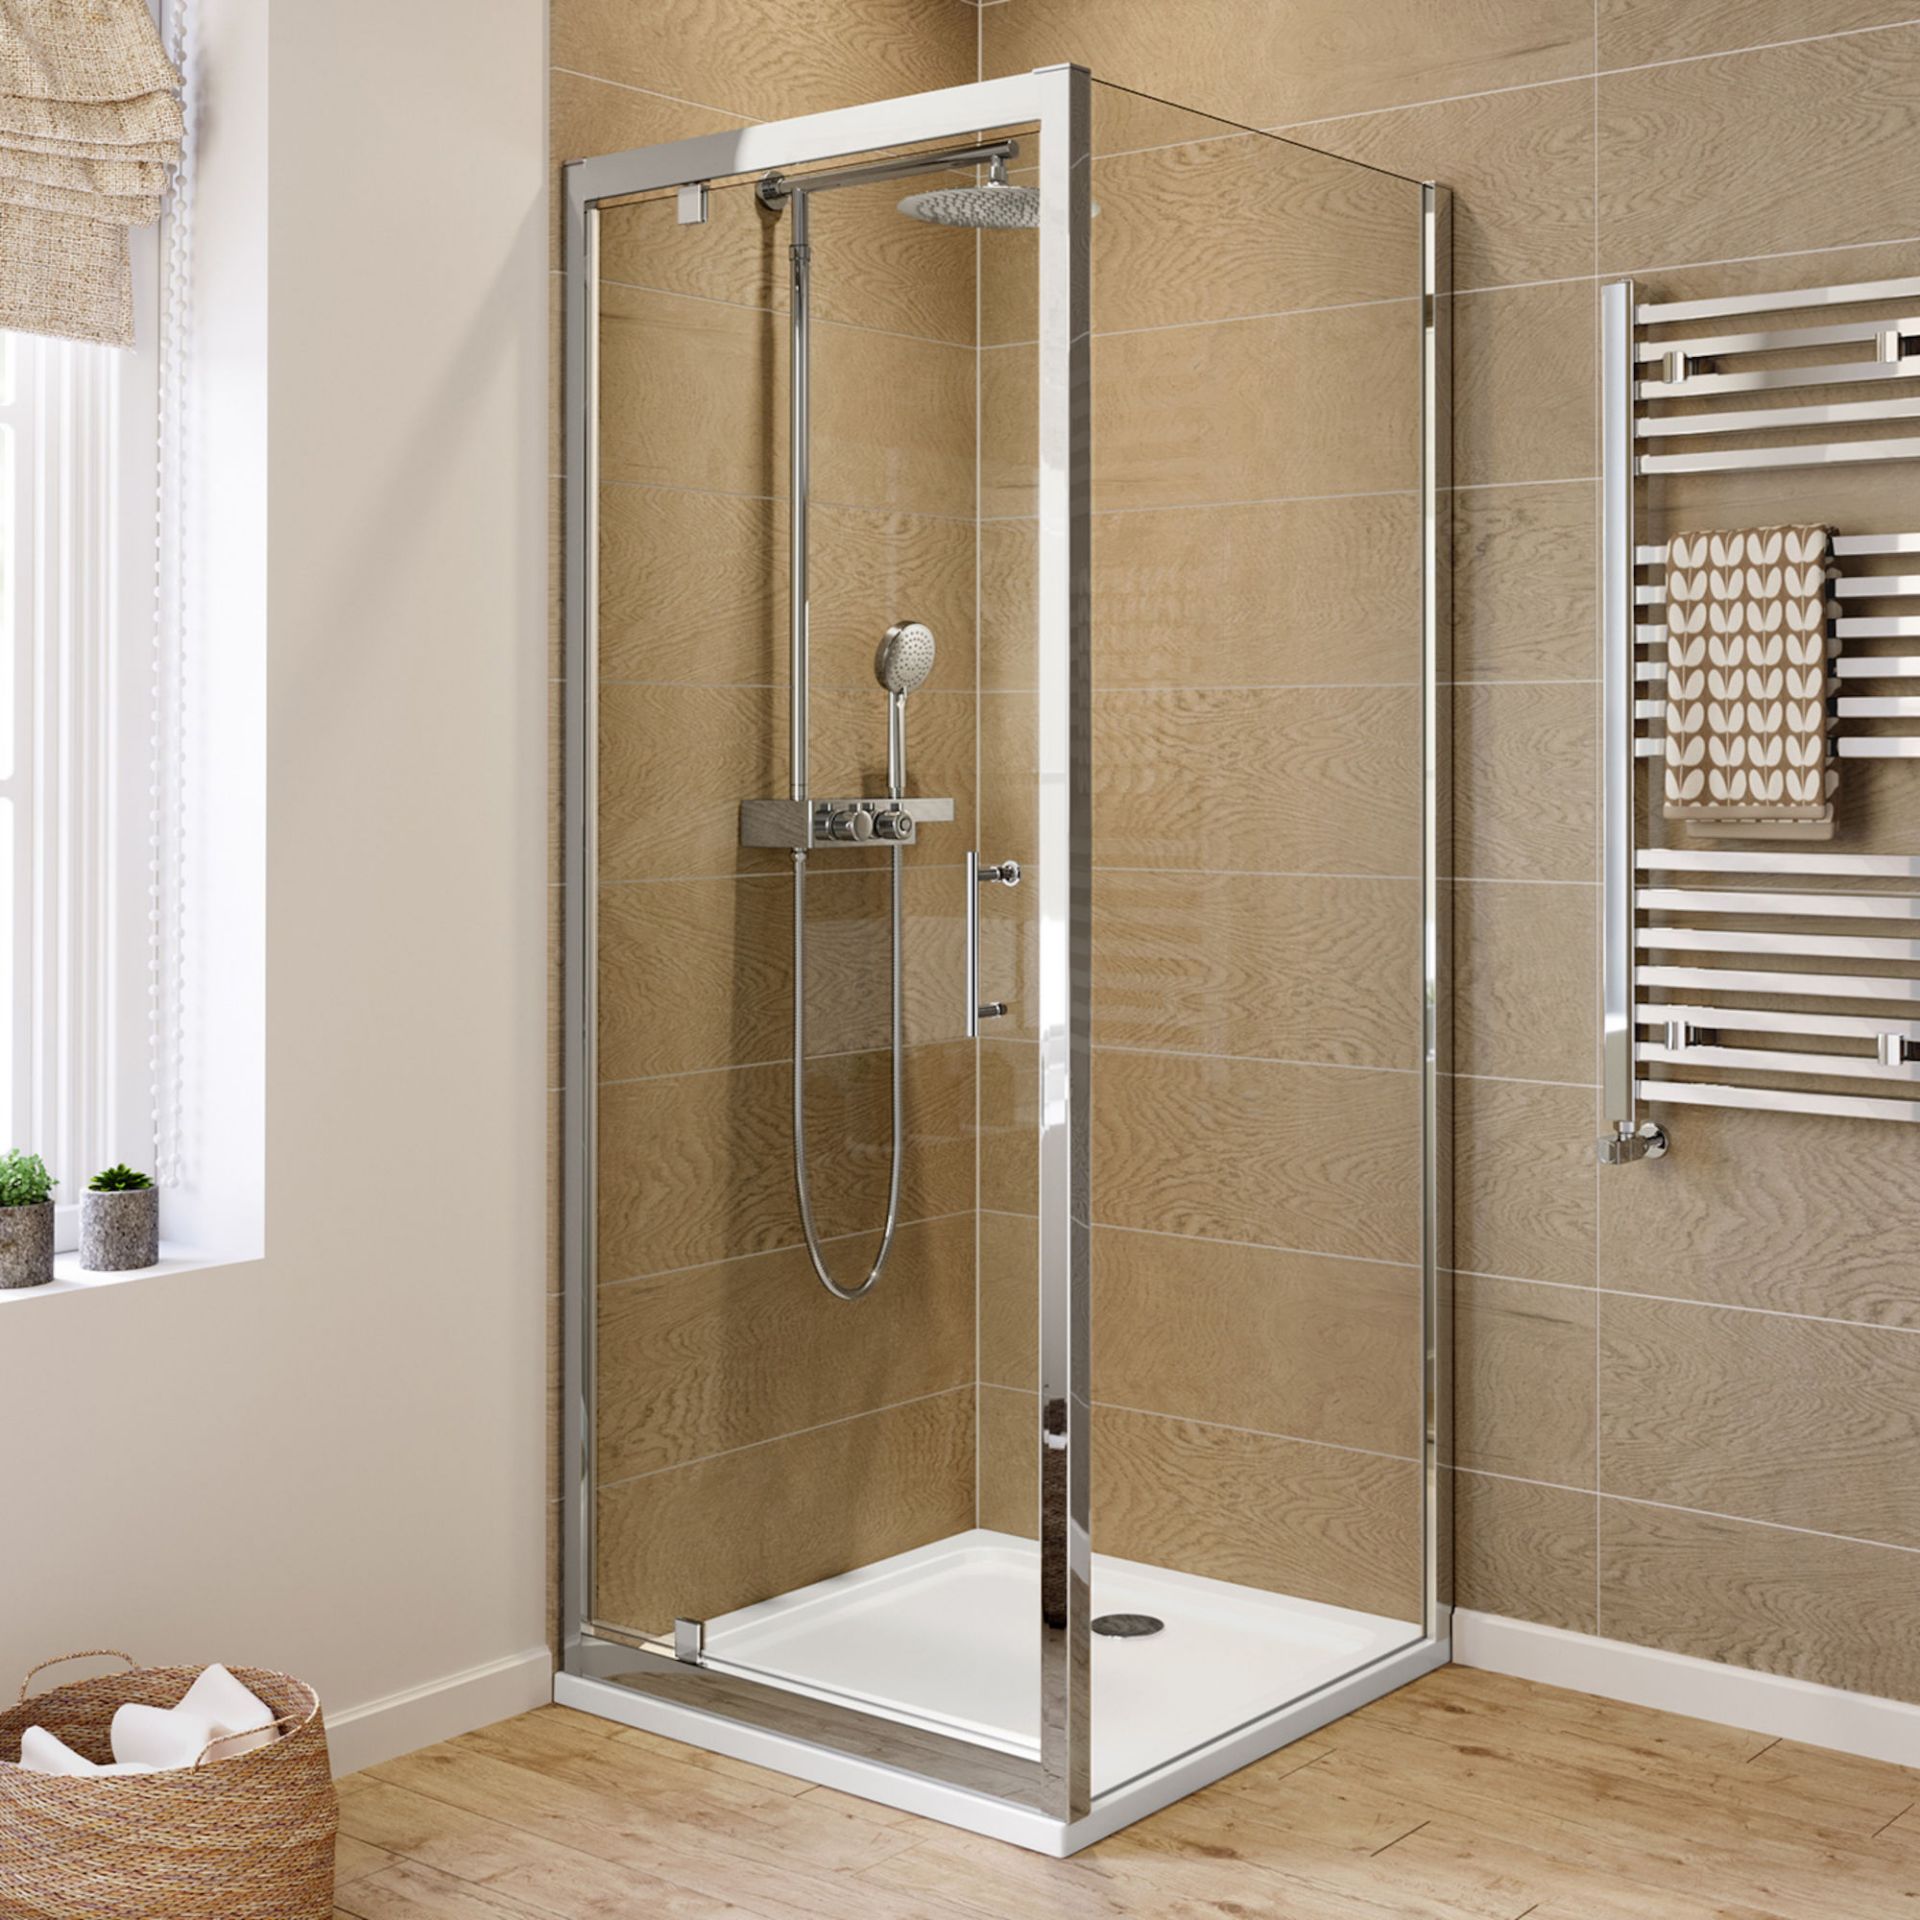 (CT101) 760x760mm - 6mm - Elements Pivot Door Shower Enclosure. RRP £309.99. 6mm Safety Glass